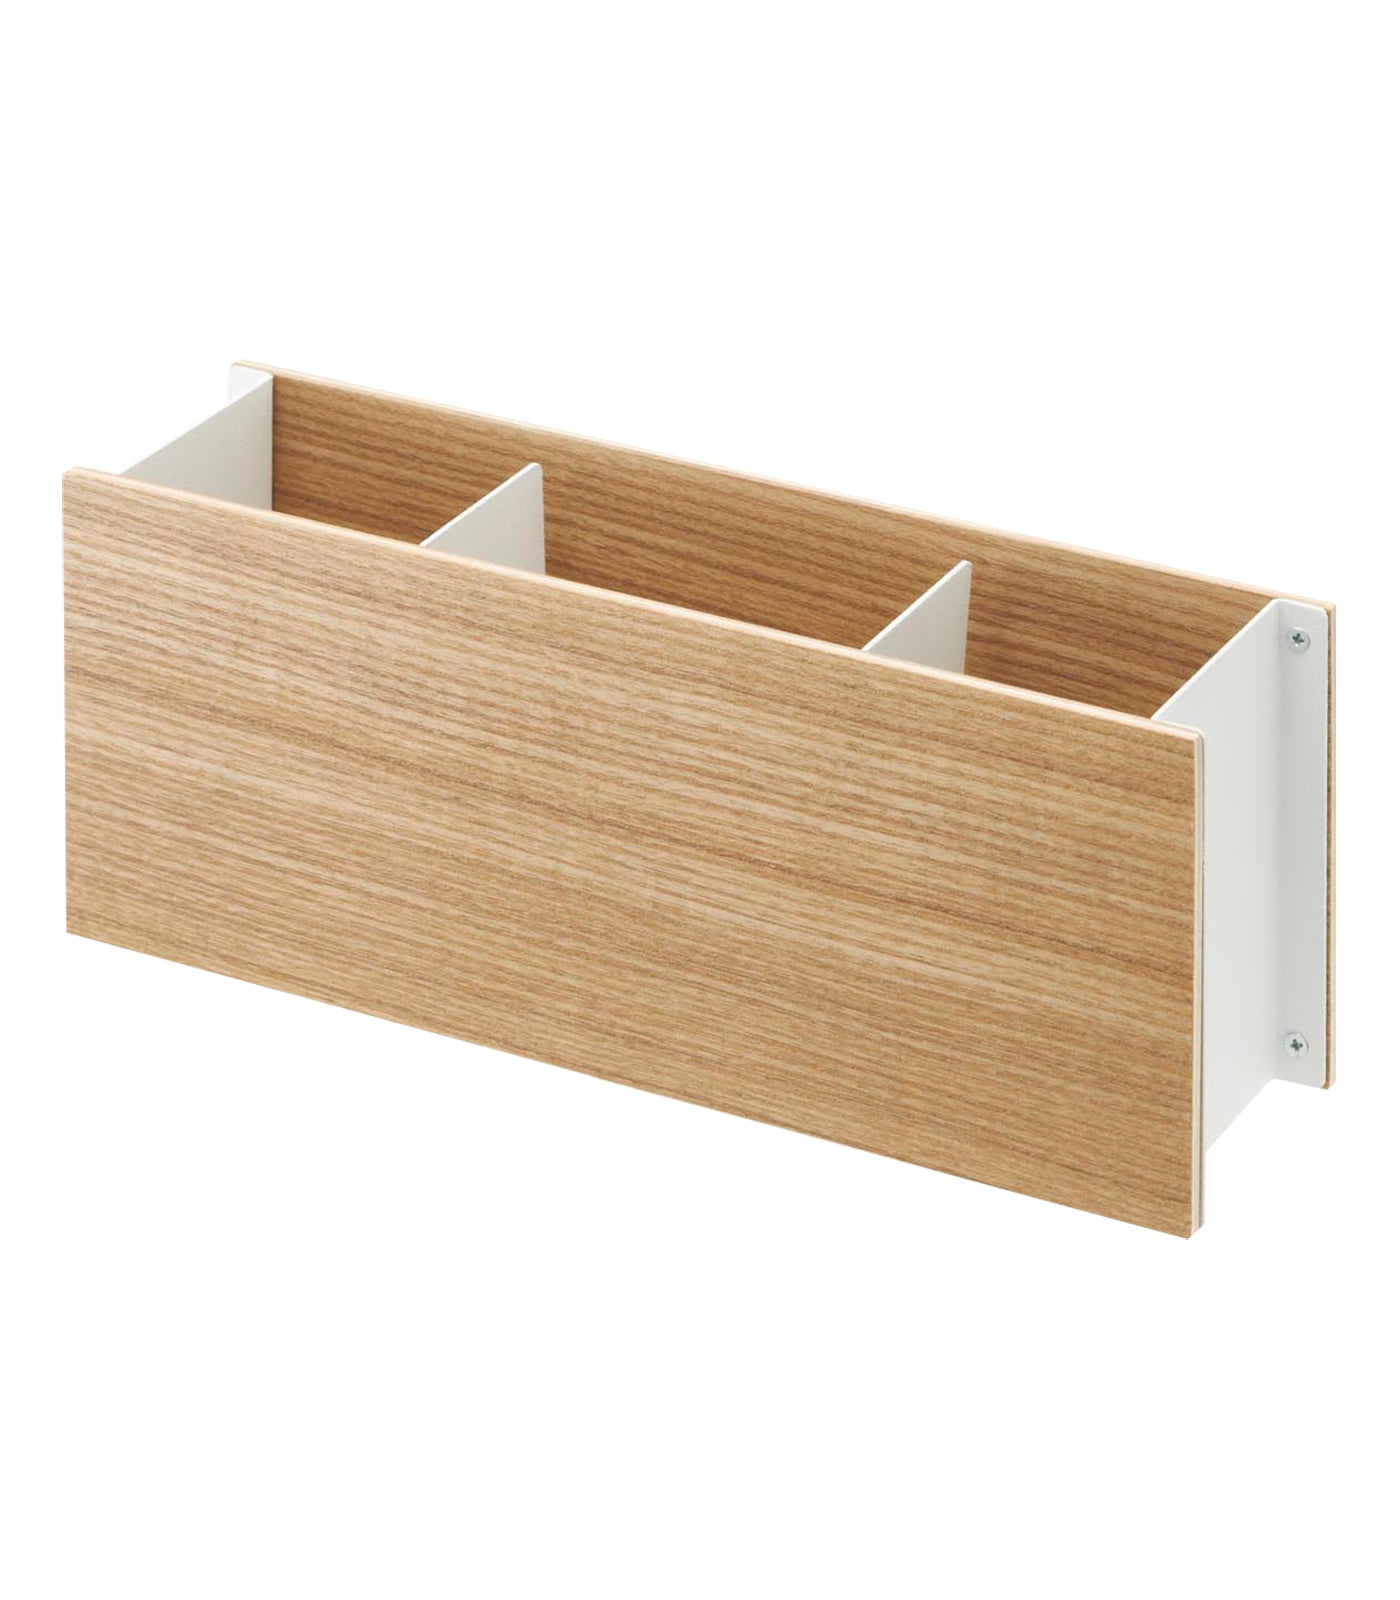 Desk Organizer - Two Sizes on a blank background.